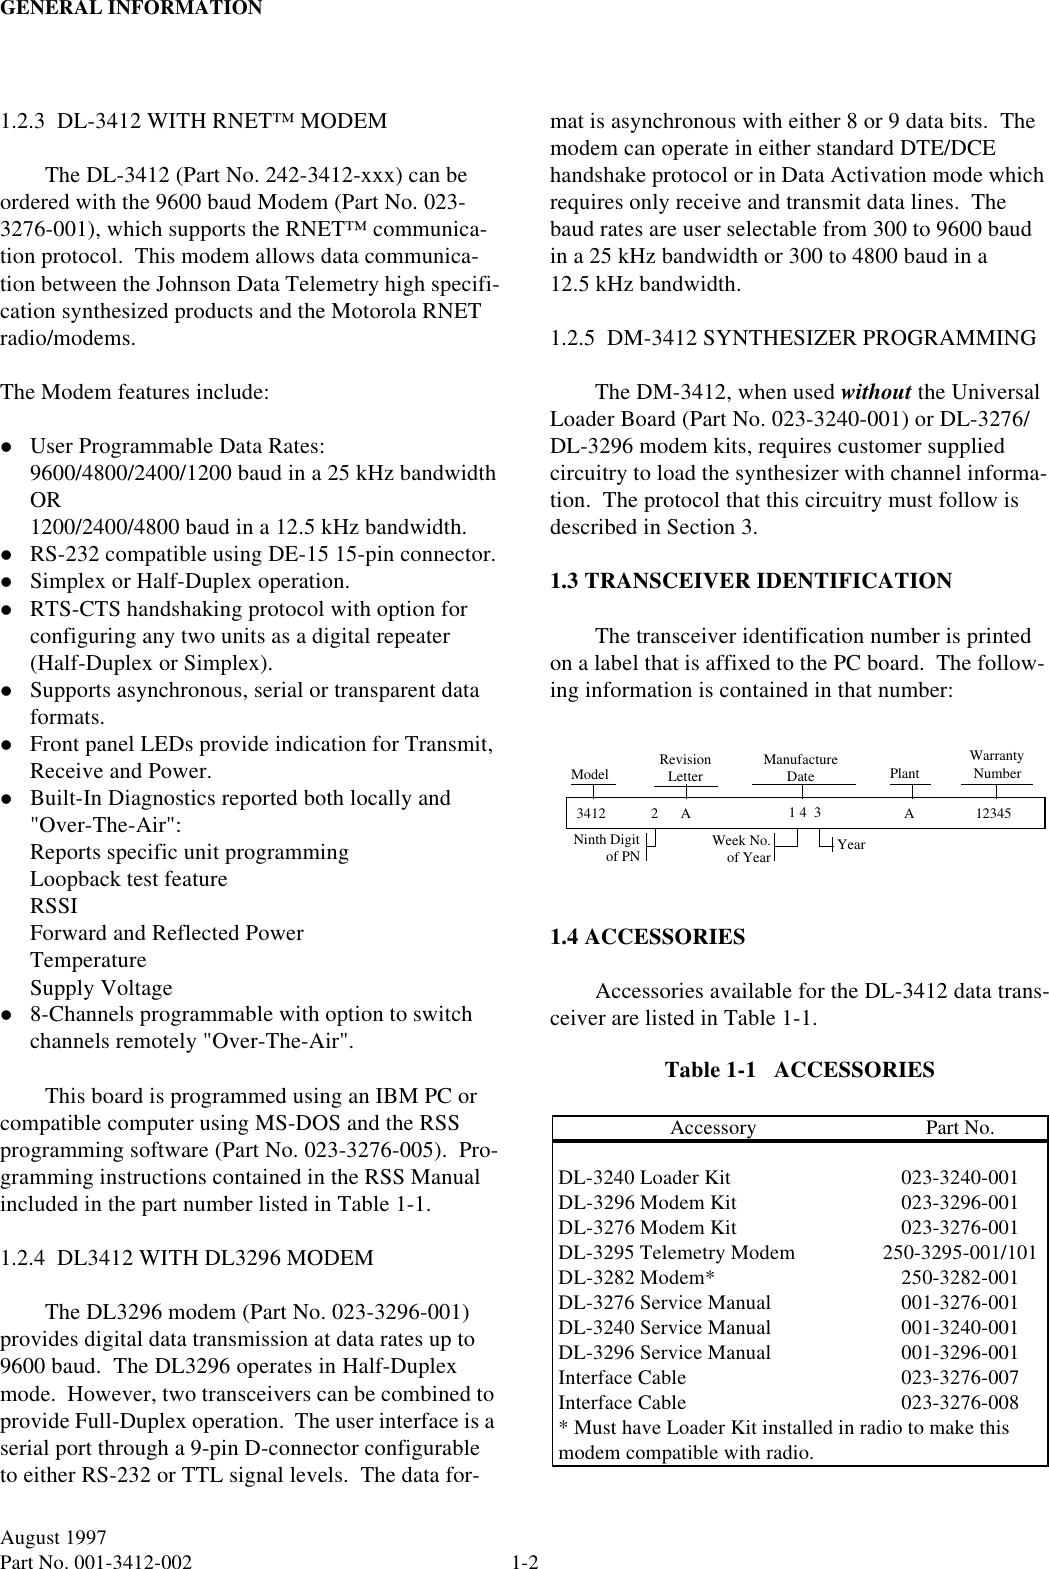 GENERAL INFORMATION1-2August 1997Part No. 001-3412-002 1.2.3  DL-3412 WITH RNET™ MODEMThe DL-3412 (Part No. 242-3412-xxx) can be ordered with the 9600 baud Modem (Part No. 023-3276-001), which supports the RNET™ communica-tion protocol.  This modem allows data communica-tion between the Johnson Data Telemetry high specifi-cation synthesized products and the Motorola RNET radio/modems.The Modem features include:lUser Programmable Data Rates:9600/4800/2400/1200 baud in a 25 kHz bandwidthOR1200/2400/4800 baud in a 12.5 kHz bandwidth.lRS-232 compatible using DE-15 15-pin connector.lSimplex or Half-Duplex operation.lRTS-CTS handshaking protocol with option for configuring any two units as a digital repeater (Half-Duplex or Simplex).lSupports asynchronous, serial or transparent data formats.lFront panel LEDs provide indication for Transmit, Receive and Power.lBuilt-In Diagnostics reported both locally and &quot;Over-The-Air&quot;:Reports specific unit programmingLoopback test featureRSSIForward and Reflected PowerTemperatureSupply Voltagel8-Channels programmable with option to switch channels remotely &quot;Over-The-Air&quot;.This board is programmed using an IBM PC or compatible computer using MS-DOS and the RSS programming software (Part No. 023-3276-005).  Pro-gramming instructions contained in the RSS Manual included in the part number listed in Table 1-1.1.2.4  DL3412 WITH DL3296 MODEMThe DL3296 modem (Part No. 023-3296-001) provides digital data transmission at data rates up to 9600 baud.  The DL3296 operates in Half-Duplex mode.  However, two transceivers can be combined to provide Full-Duplex operation.  The user interface is a serial port through a 9-pin D-connector configurable to either RS-232 or TTL signal levels.  The data for-mat is asynchronous with either 8 or 9 data bits.  The modem can operate in either standard DTE/DCE handshake protocol or in Data Activation mode which requires only receive and transmit data lines.  The baud rates are user selectable from 300 to 9600 baud in a 25 kHz bandwidth or 300 to 4800 baud in a 12.5 kHz bandwidth.1.2.5  DM-3412 SYNTHESIZER PROGRAMMINGThe DM-3412, when used without the Universal Loader Board (Part No. 023-3240-001) or DL-3276/DL-3296 modem kits, requires customer supplied circuitry to load the synthesizer with channel informa-tion.  The protocol that this circuitry must follow is described in Section 3.1.3 TRANSCEIVER IDENTIFICATIONThe transceiver identification number is printed on a label that is affixed to the PC board.  The follow-ing information is contained in that number:1.4 ACCESSORIESAccessories available for the DL-3412 data trans-ceiver are listed in Table 1-1.Table 1-1   ACCESSORIESAccessory Part No.DL-3240 Loader Kit 023-3240-001DL-3296 Modem Kit 023-3296-001DL-3276 Modem Kit 023-3276-001DL-3295 Telemetry Modem 250-3295-001/101DL-3282 Modem* 250-3282-001DL-3276 Service Manual 001-3276-001DL-3240 Service Manual 001-3240-001DL-3296 Service Manual 001-3296-001Interface Cable 023-3276-007Interface Cable 023-3276-008* Must have Loader Kit installed in radio to make this modem compatible with radio.3412 2A 1 4  3 A12345Model RevisionLetterNinth Digitof PNManufactureDateWeek No.of Year YearPlantWarrantyNumber